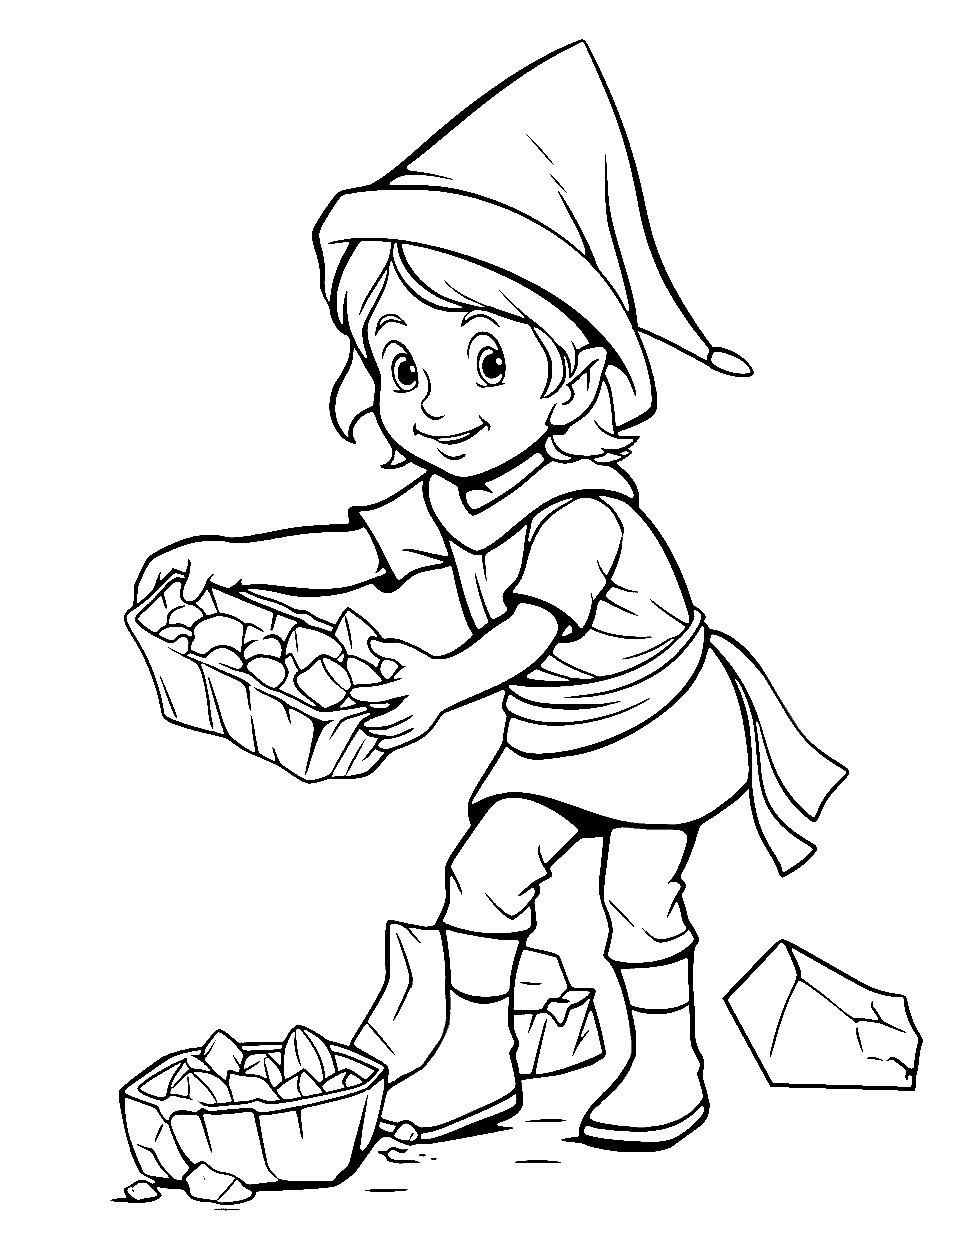 Elf Miner Extracting Crystals Coloring Page - An elf miner extracting crystals in a cave.